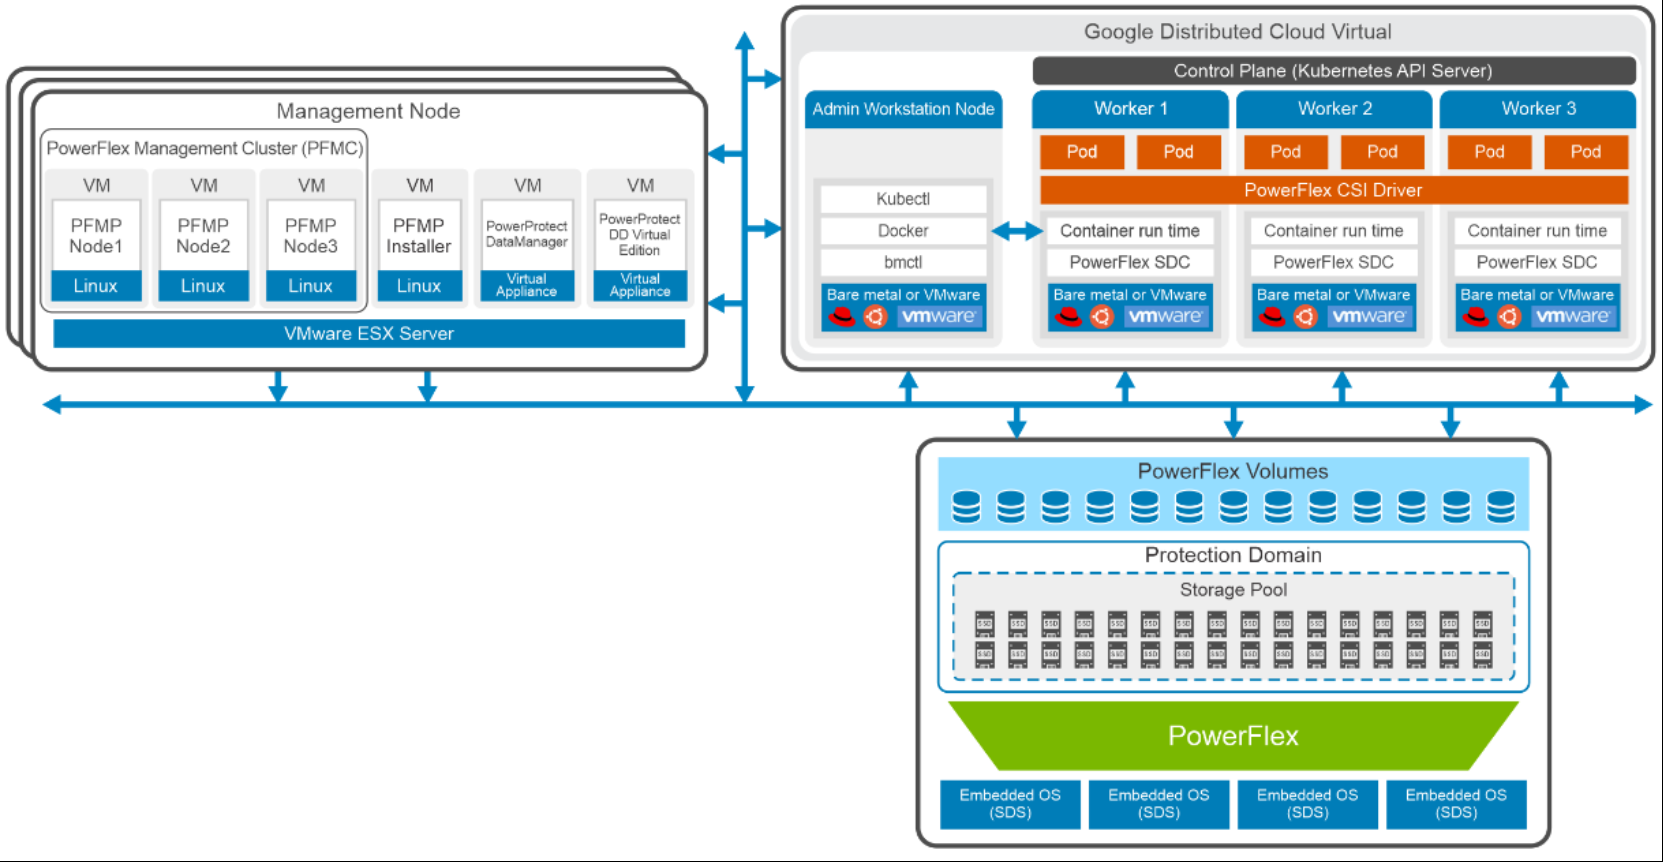 This figure shows the logical architecture of a PowerFlex two layer deployment with GDC virtual.